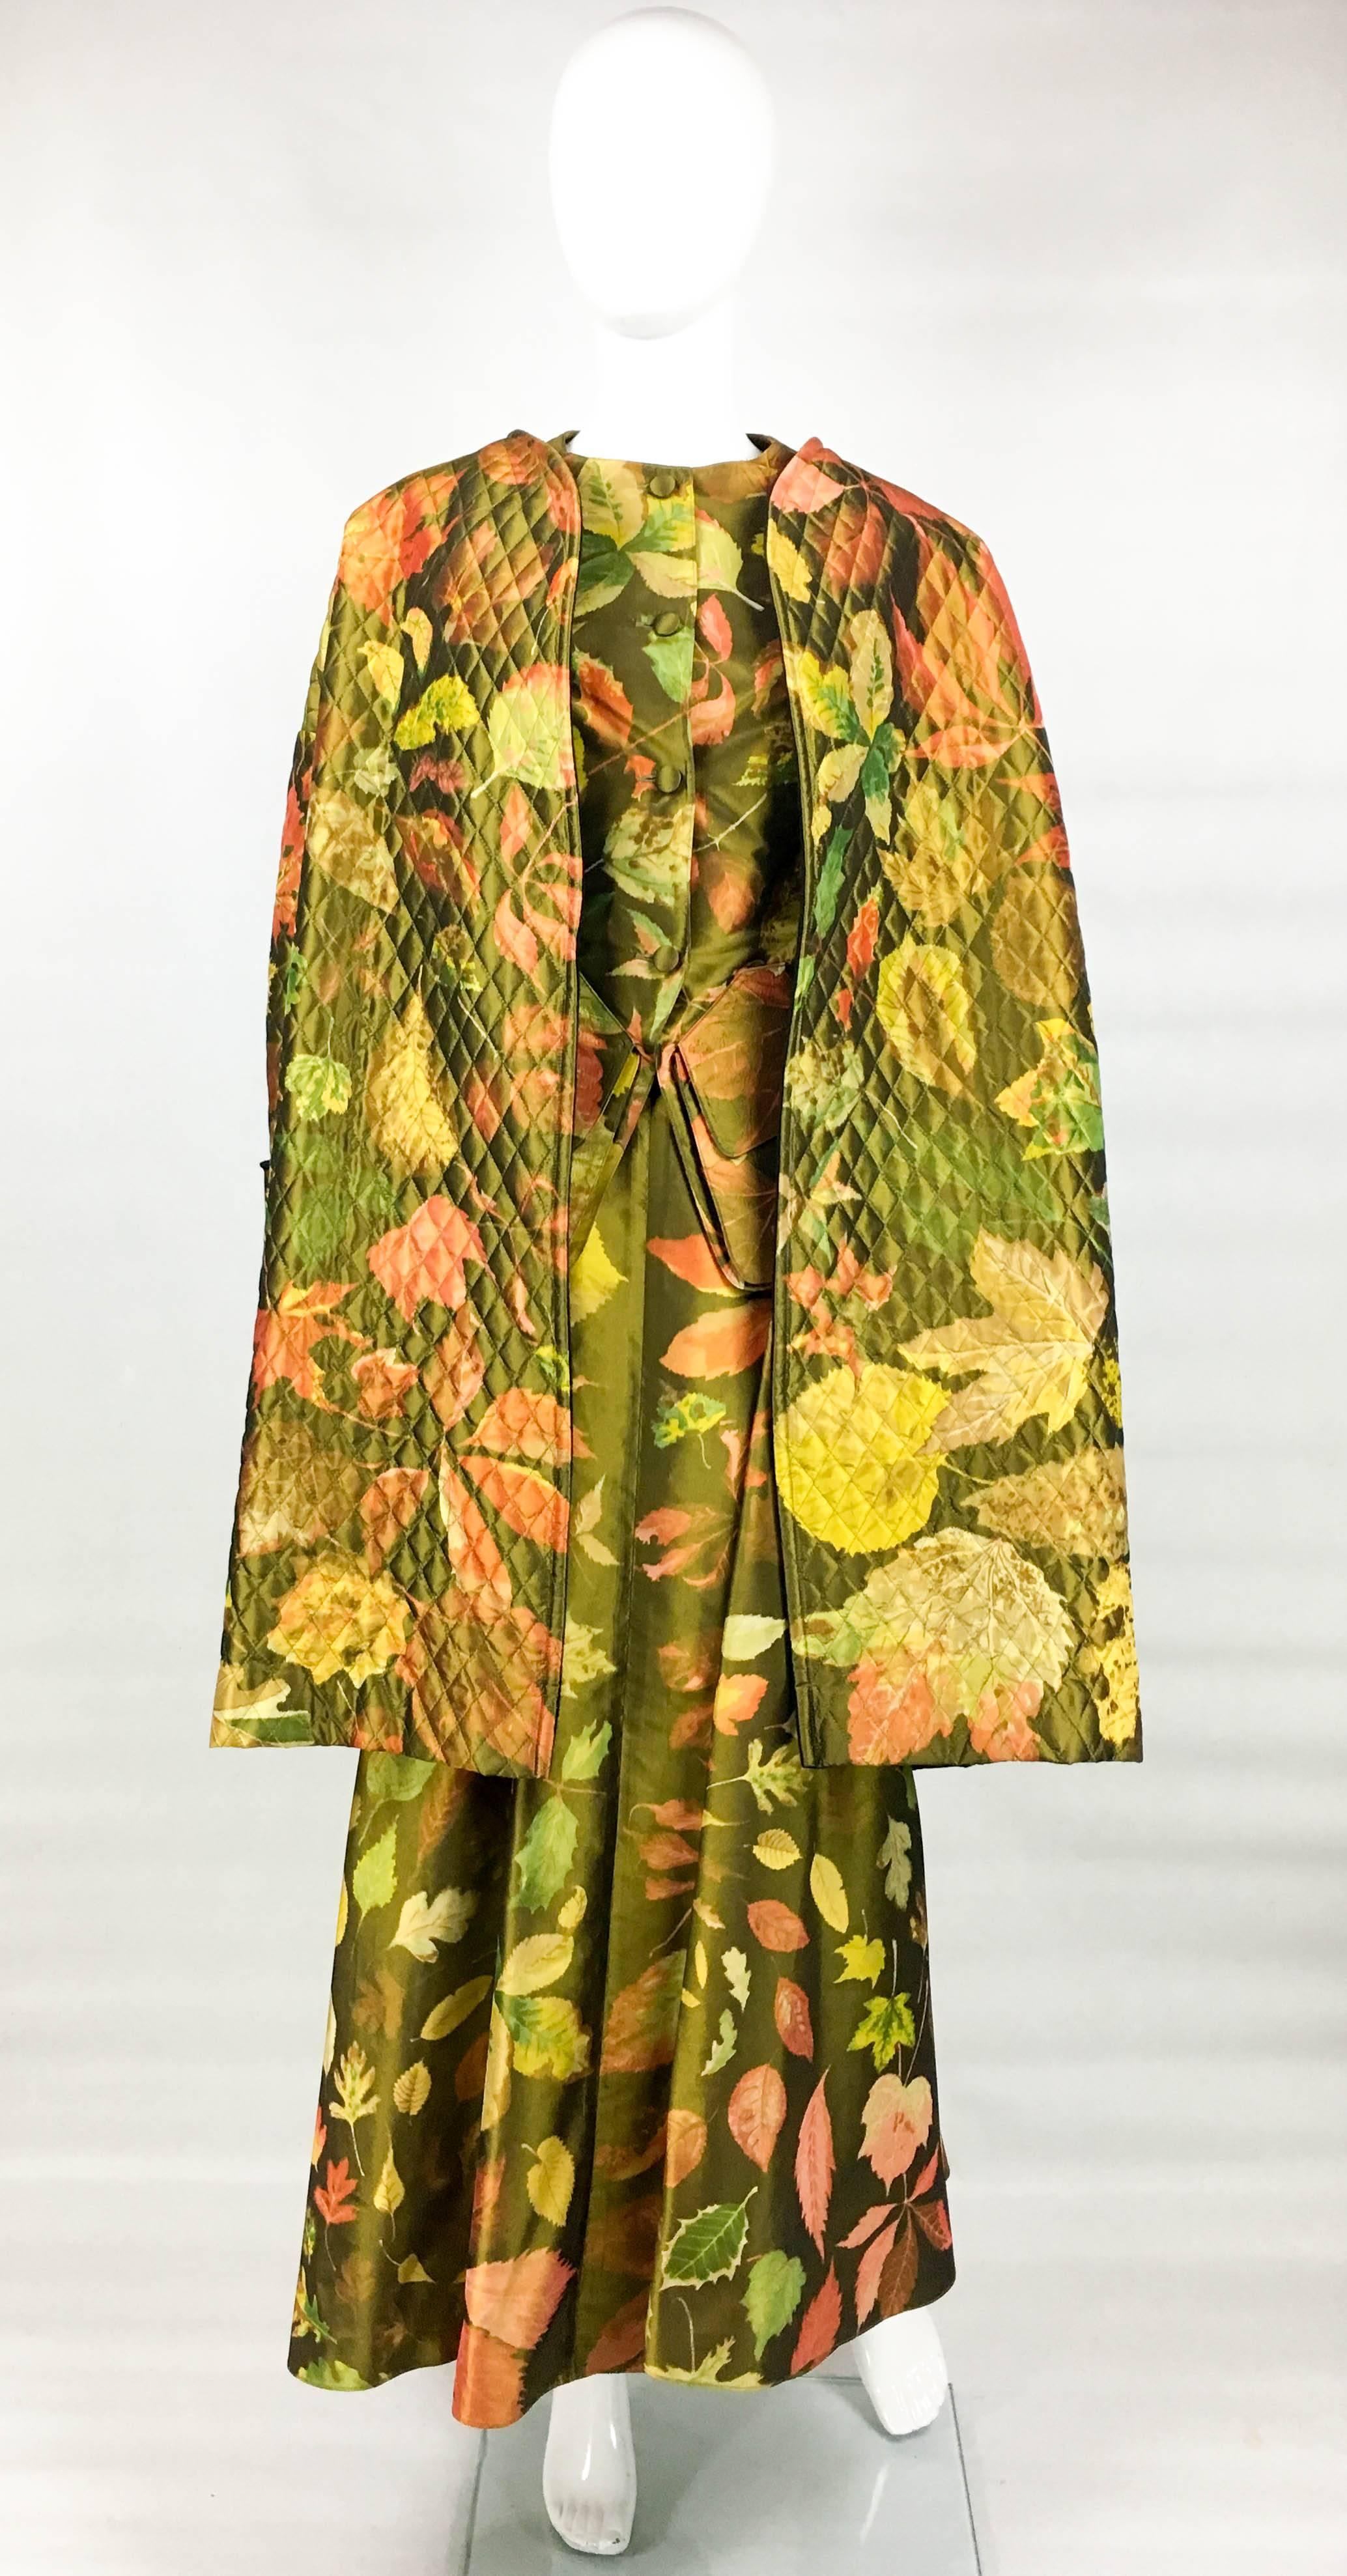 cocktail ensemble comprising dress and jacket in printed silk